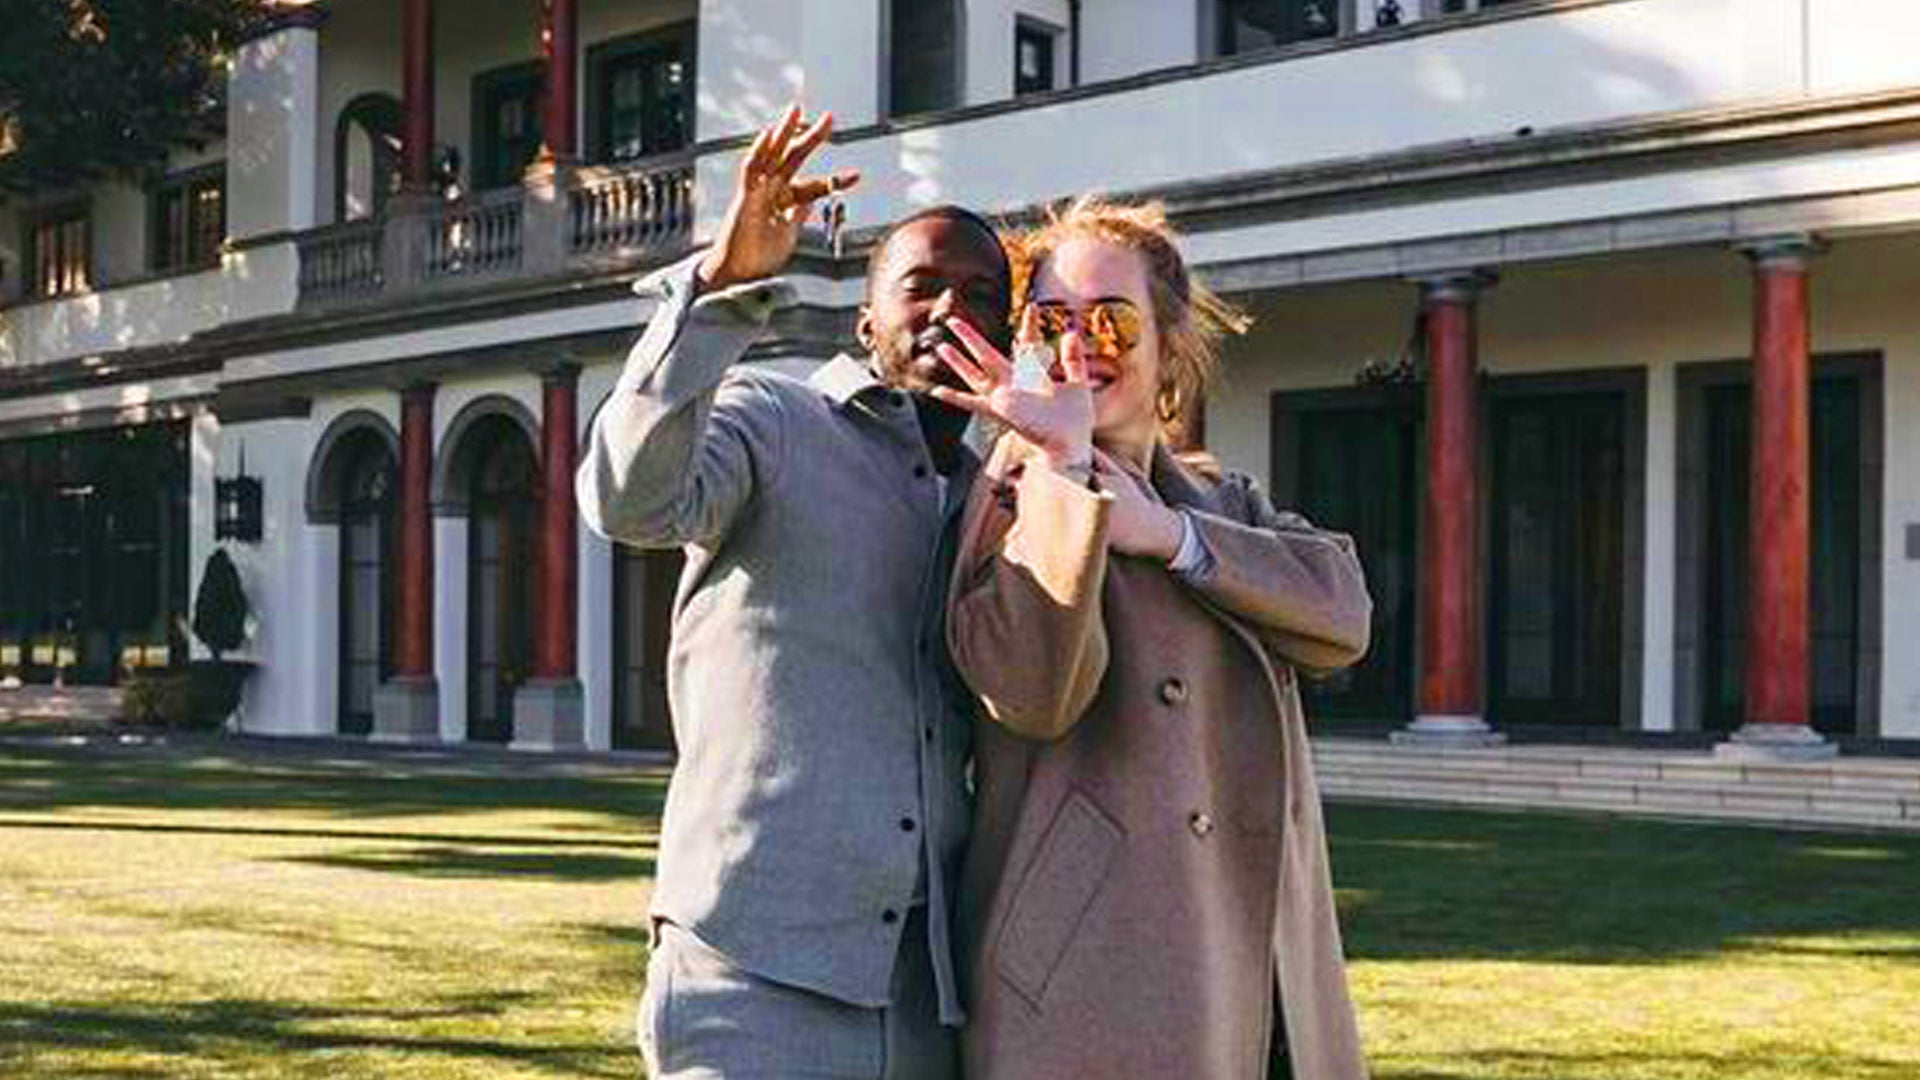 Adele makes rare appearance with Rich Paul as they attend friend's wedding